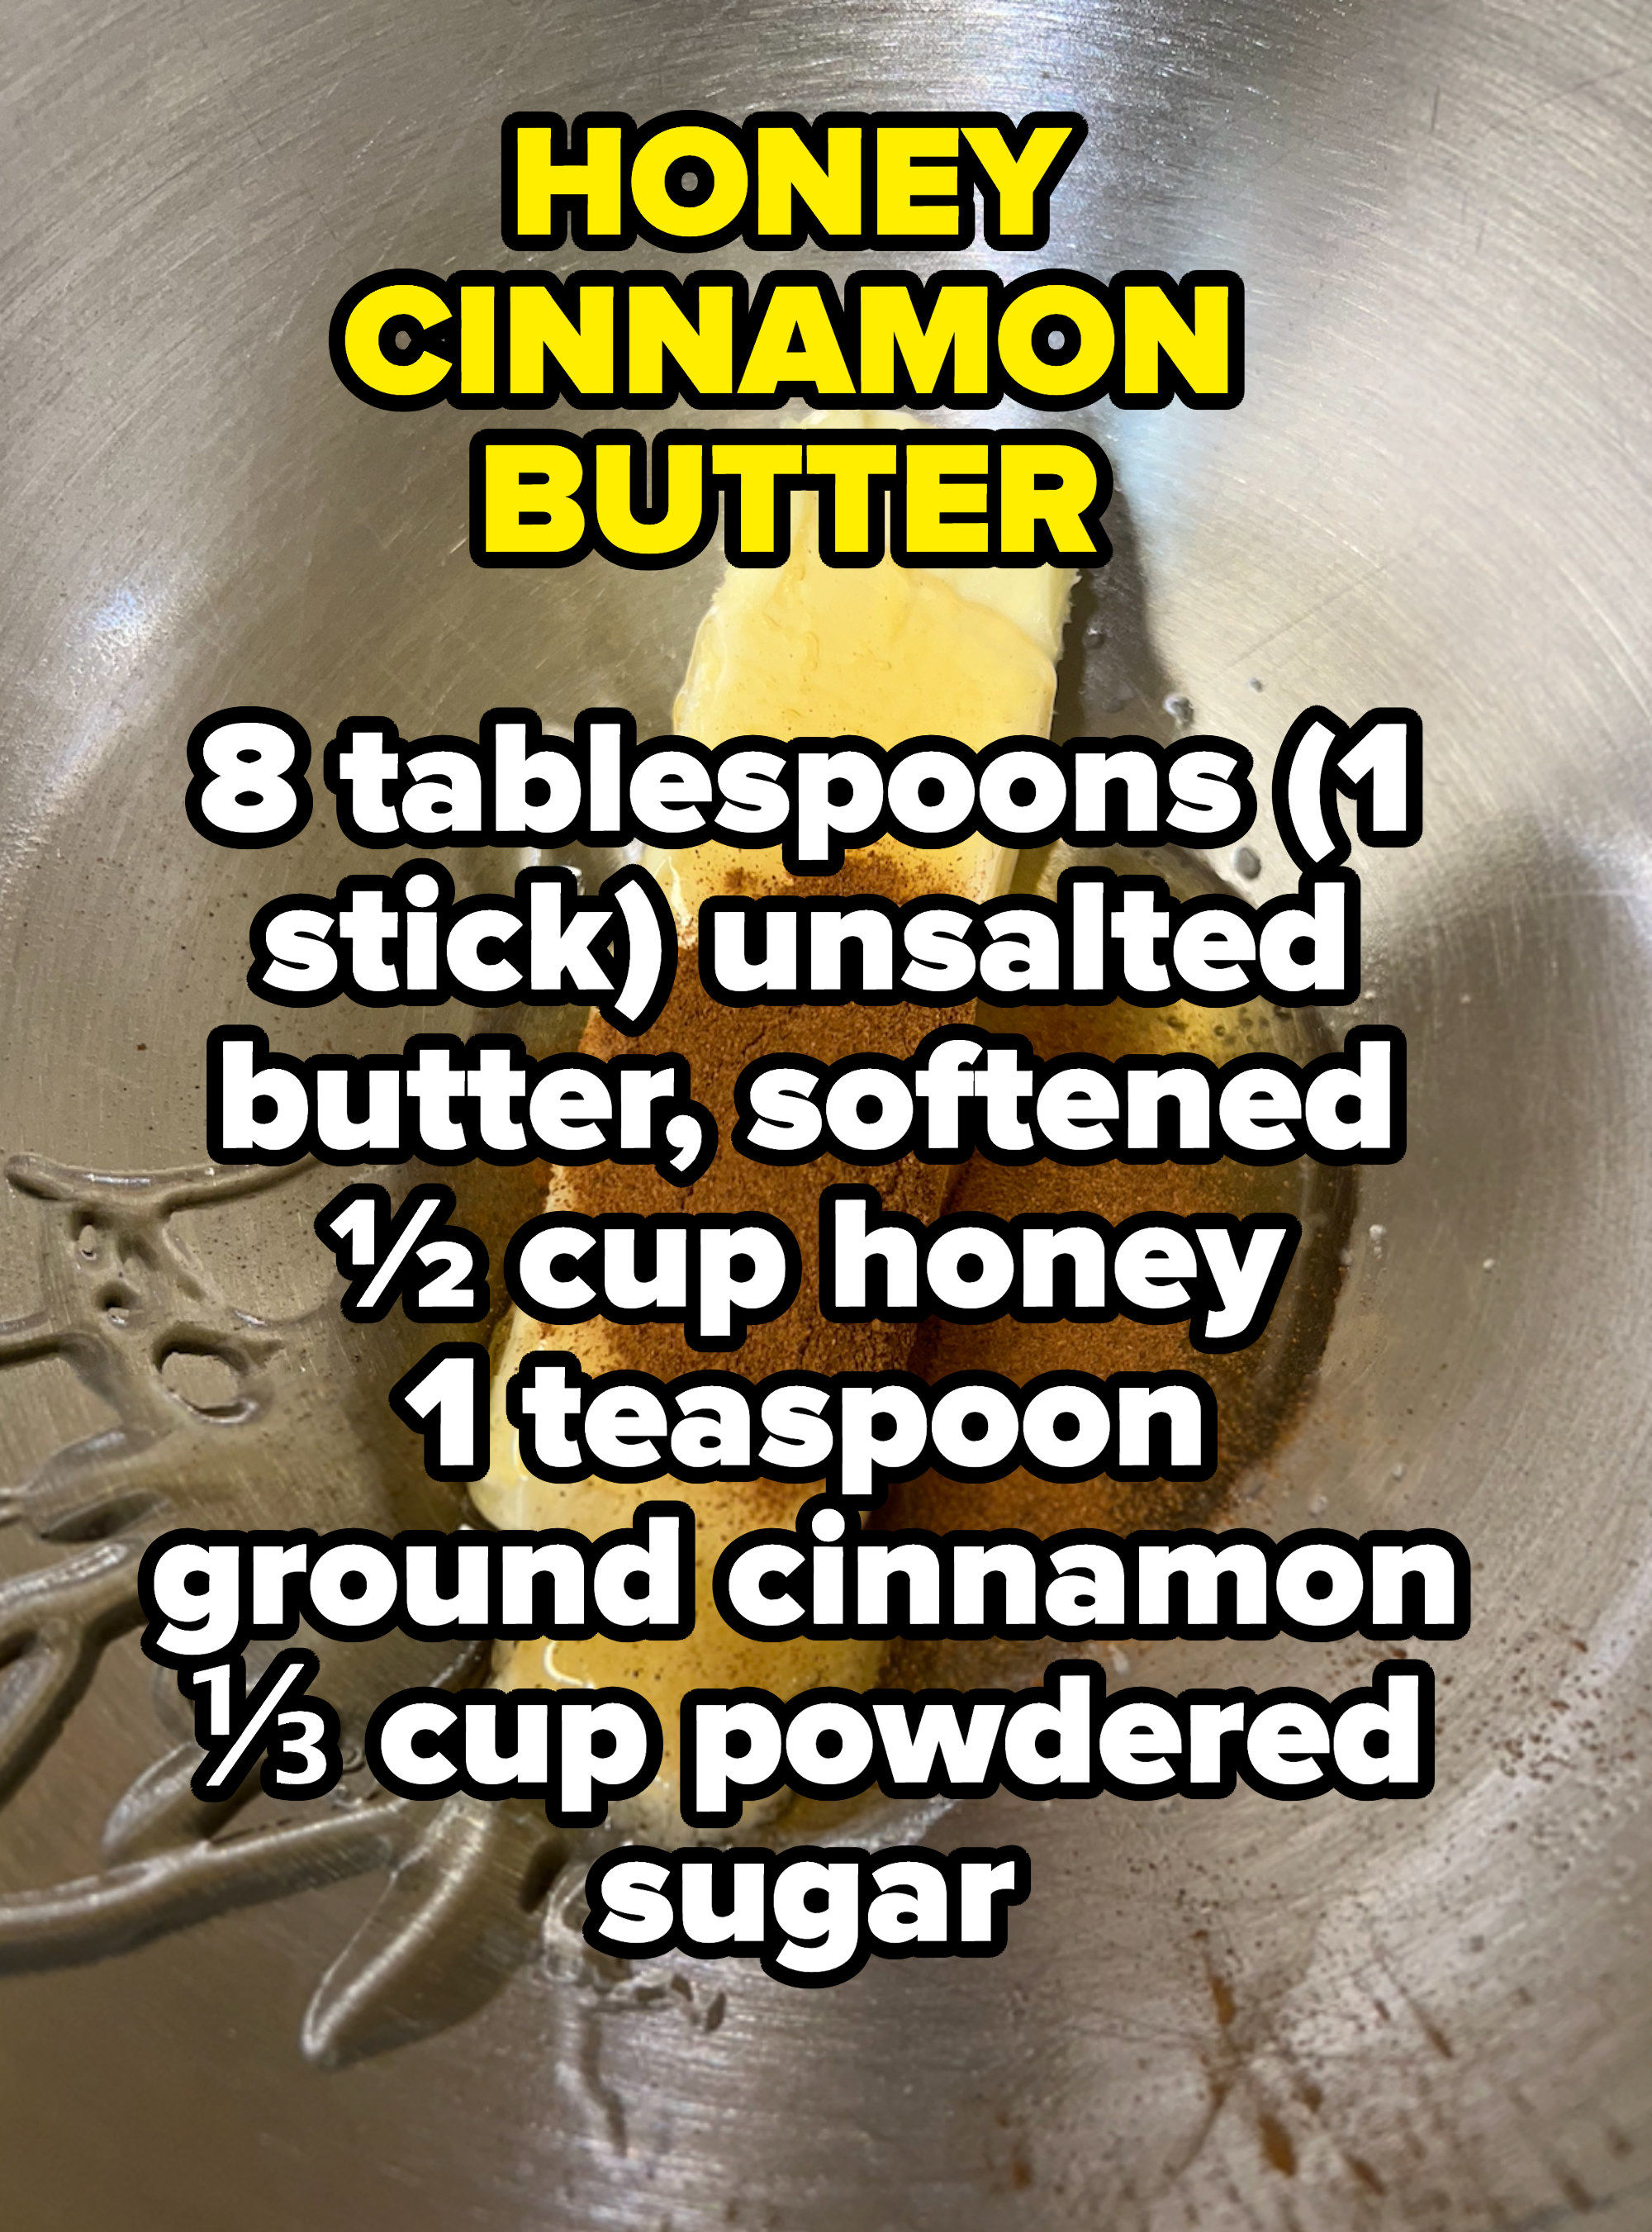 Honey butter: 8 tablespoons (1 stick) unsalted butter, softened, 1/2 cup honey, 1 teaspoon ground cinnamon, 1/3 cup powdered sugar